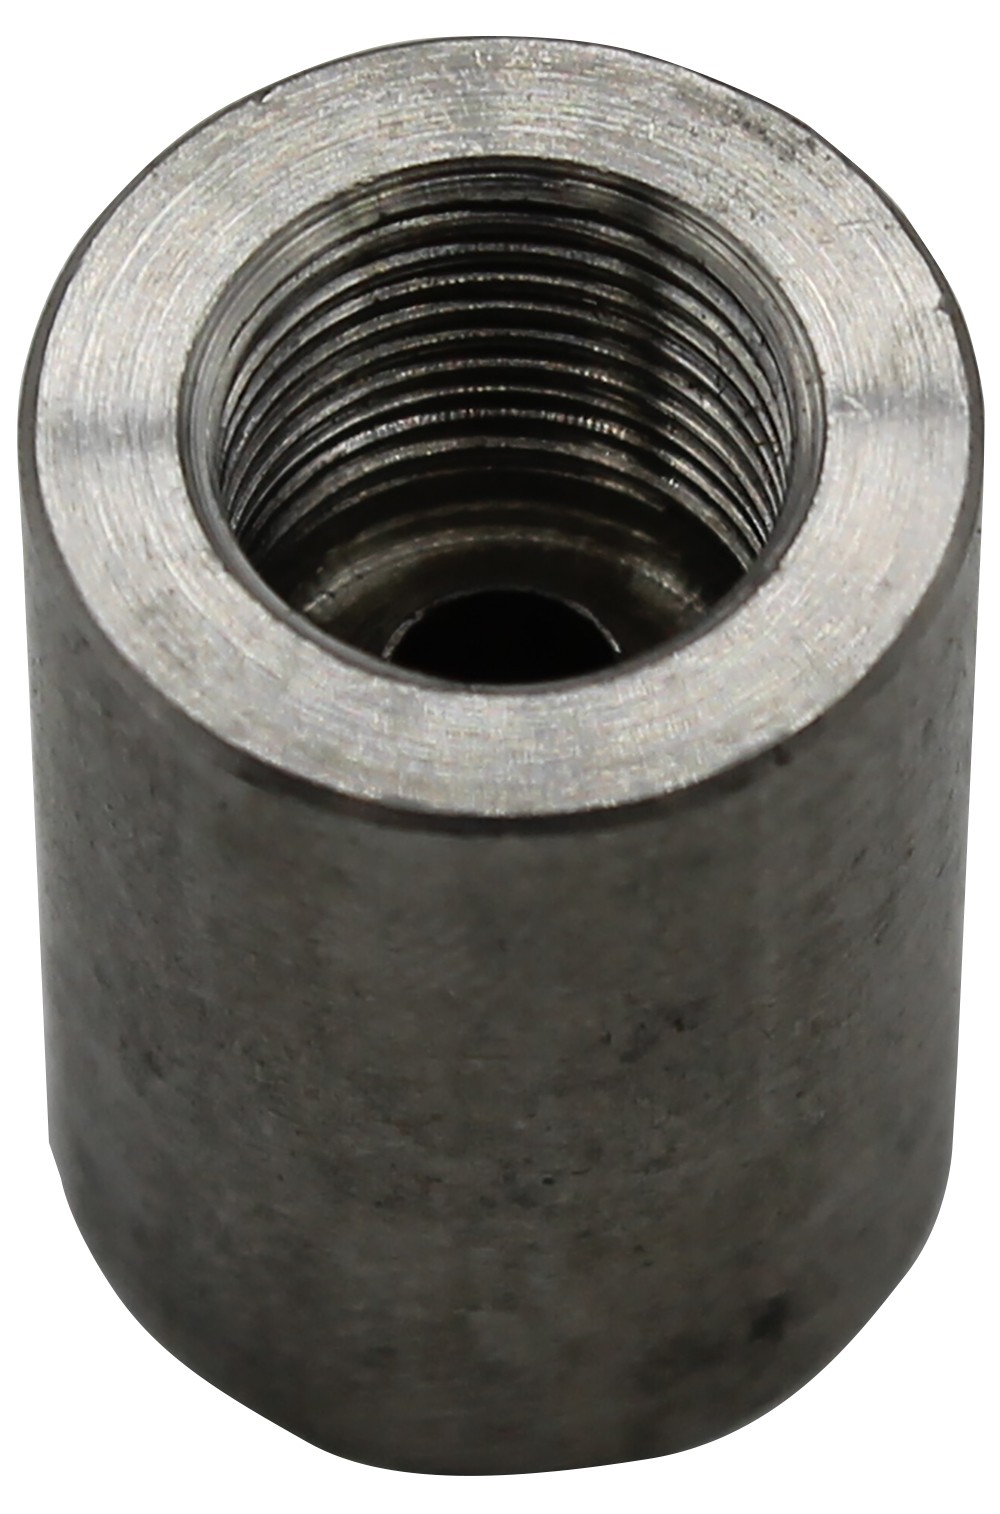 12MM X 1.0 - 3/4" REVERSE FLARE BUNG